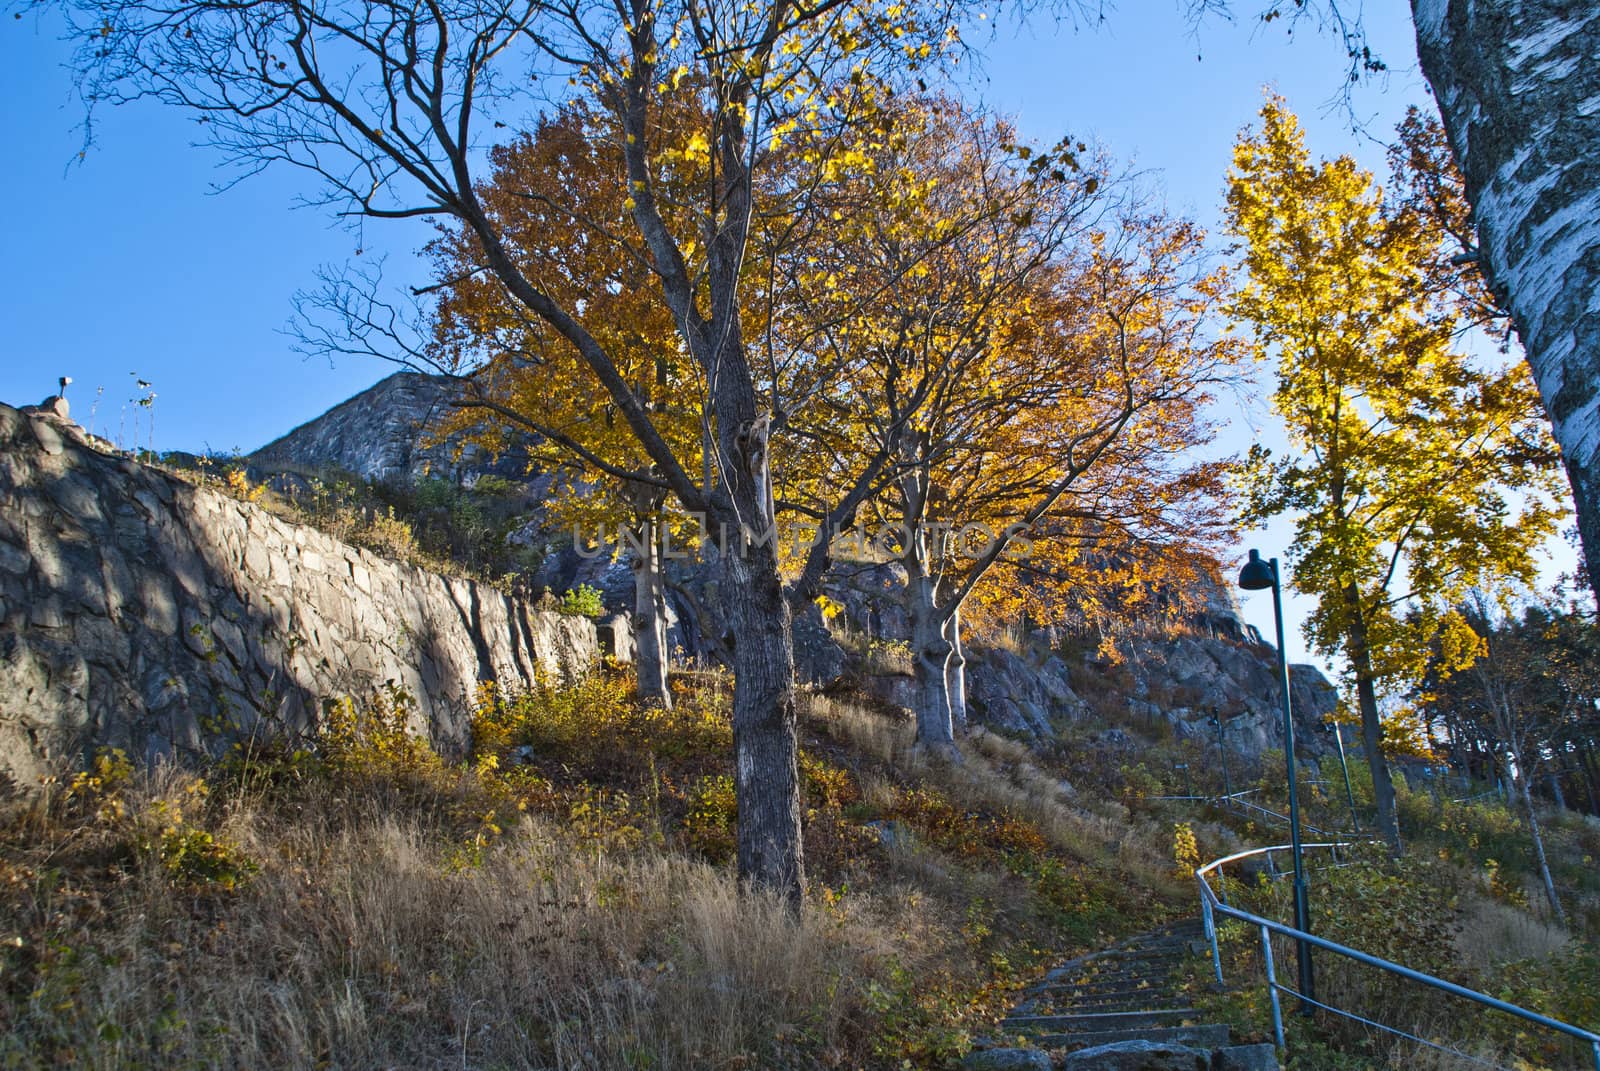 stairway which extends from halden city and up to fredriksten fortress and is surrounded with leaves trees, picture is shot in october 2012.